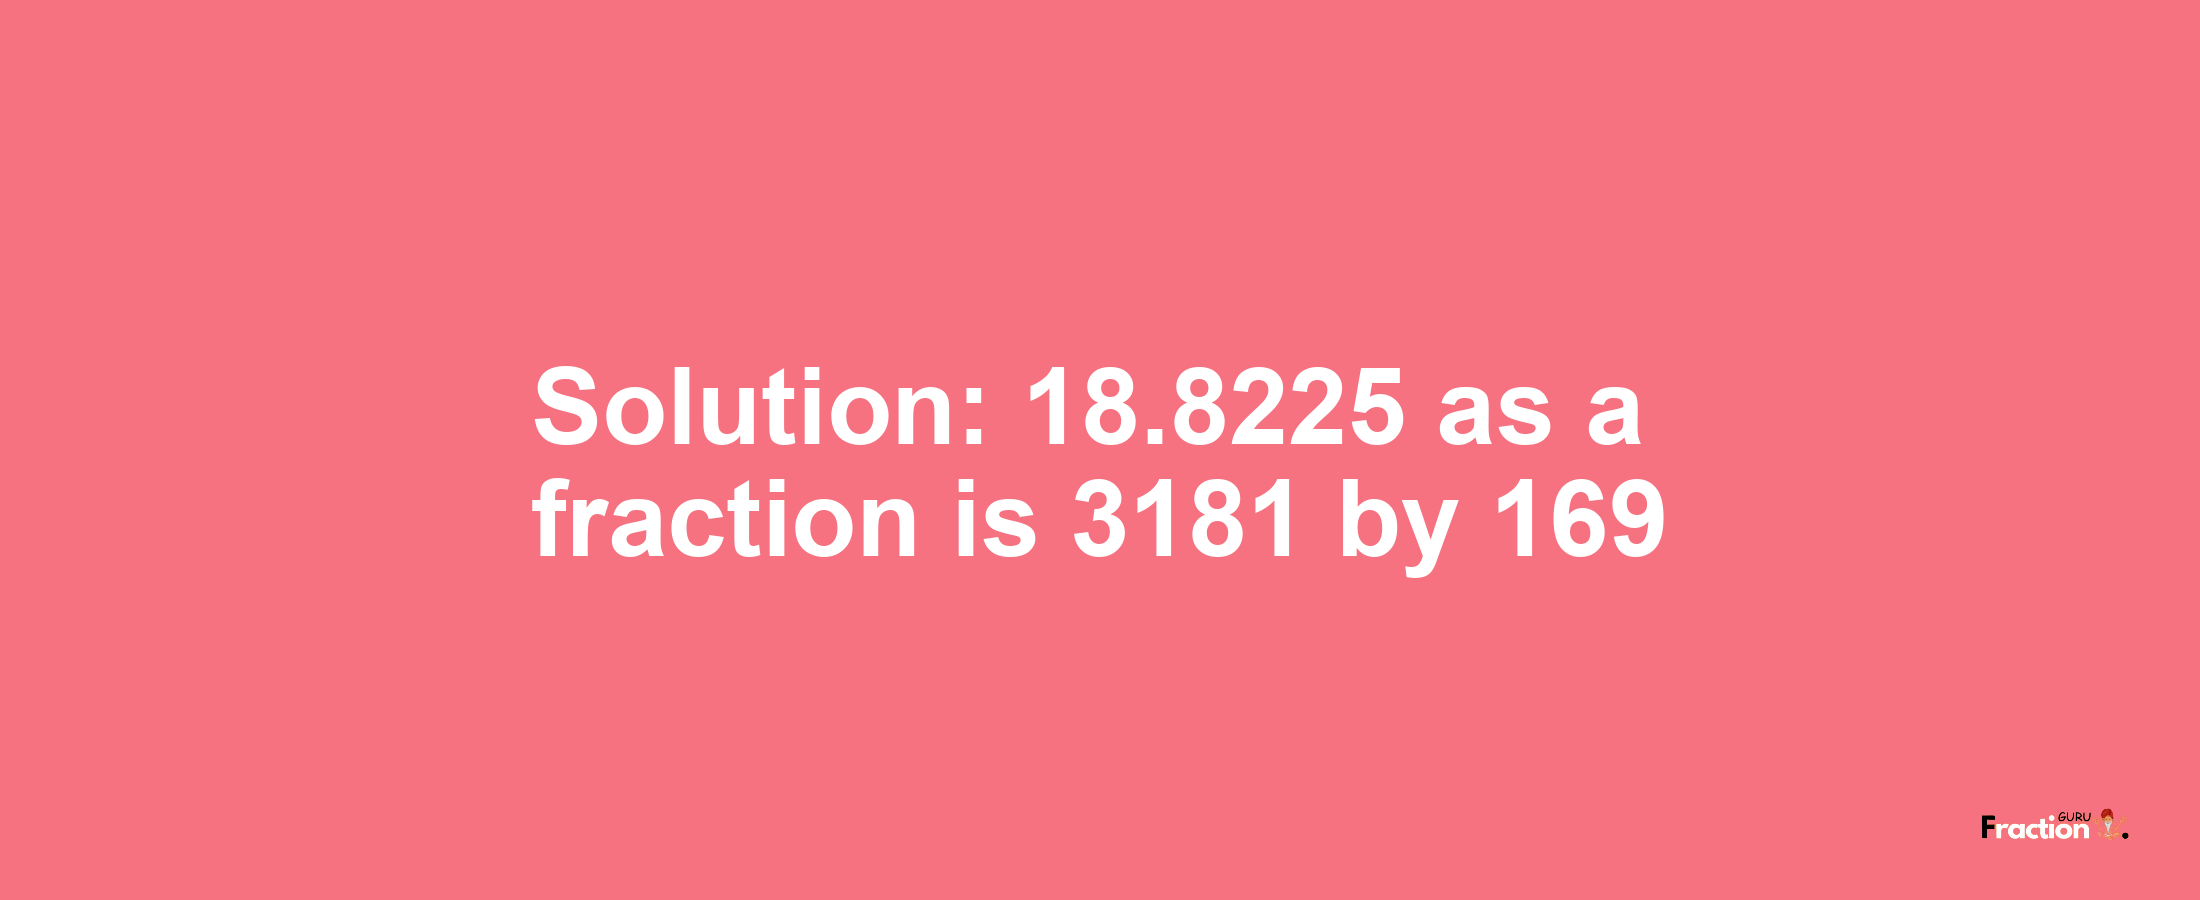 Solution:18.8225 as a fraction is 3181/169